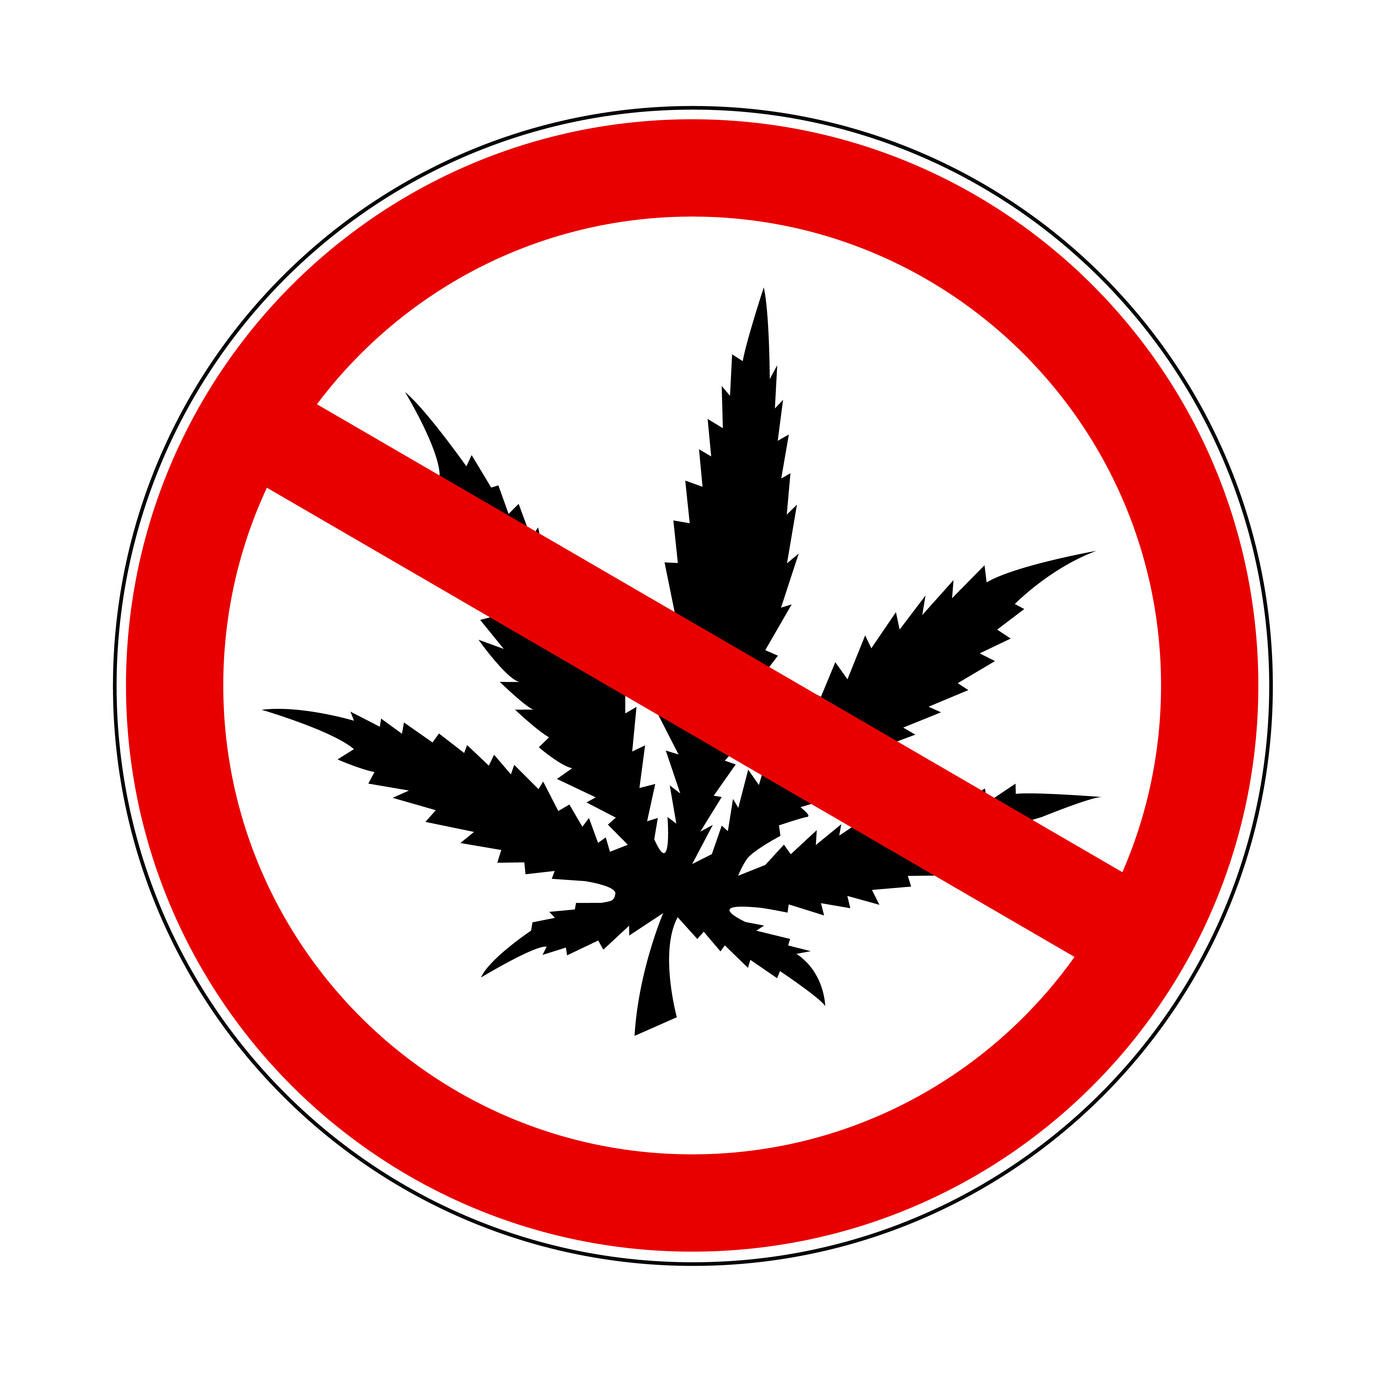 cannabis symbol crossed out